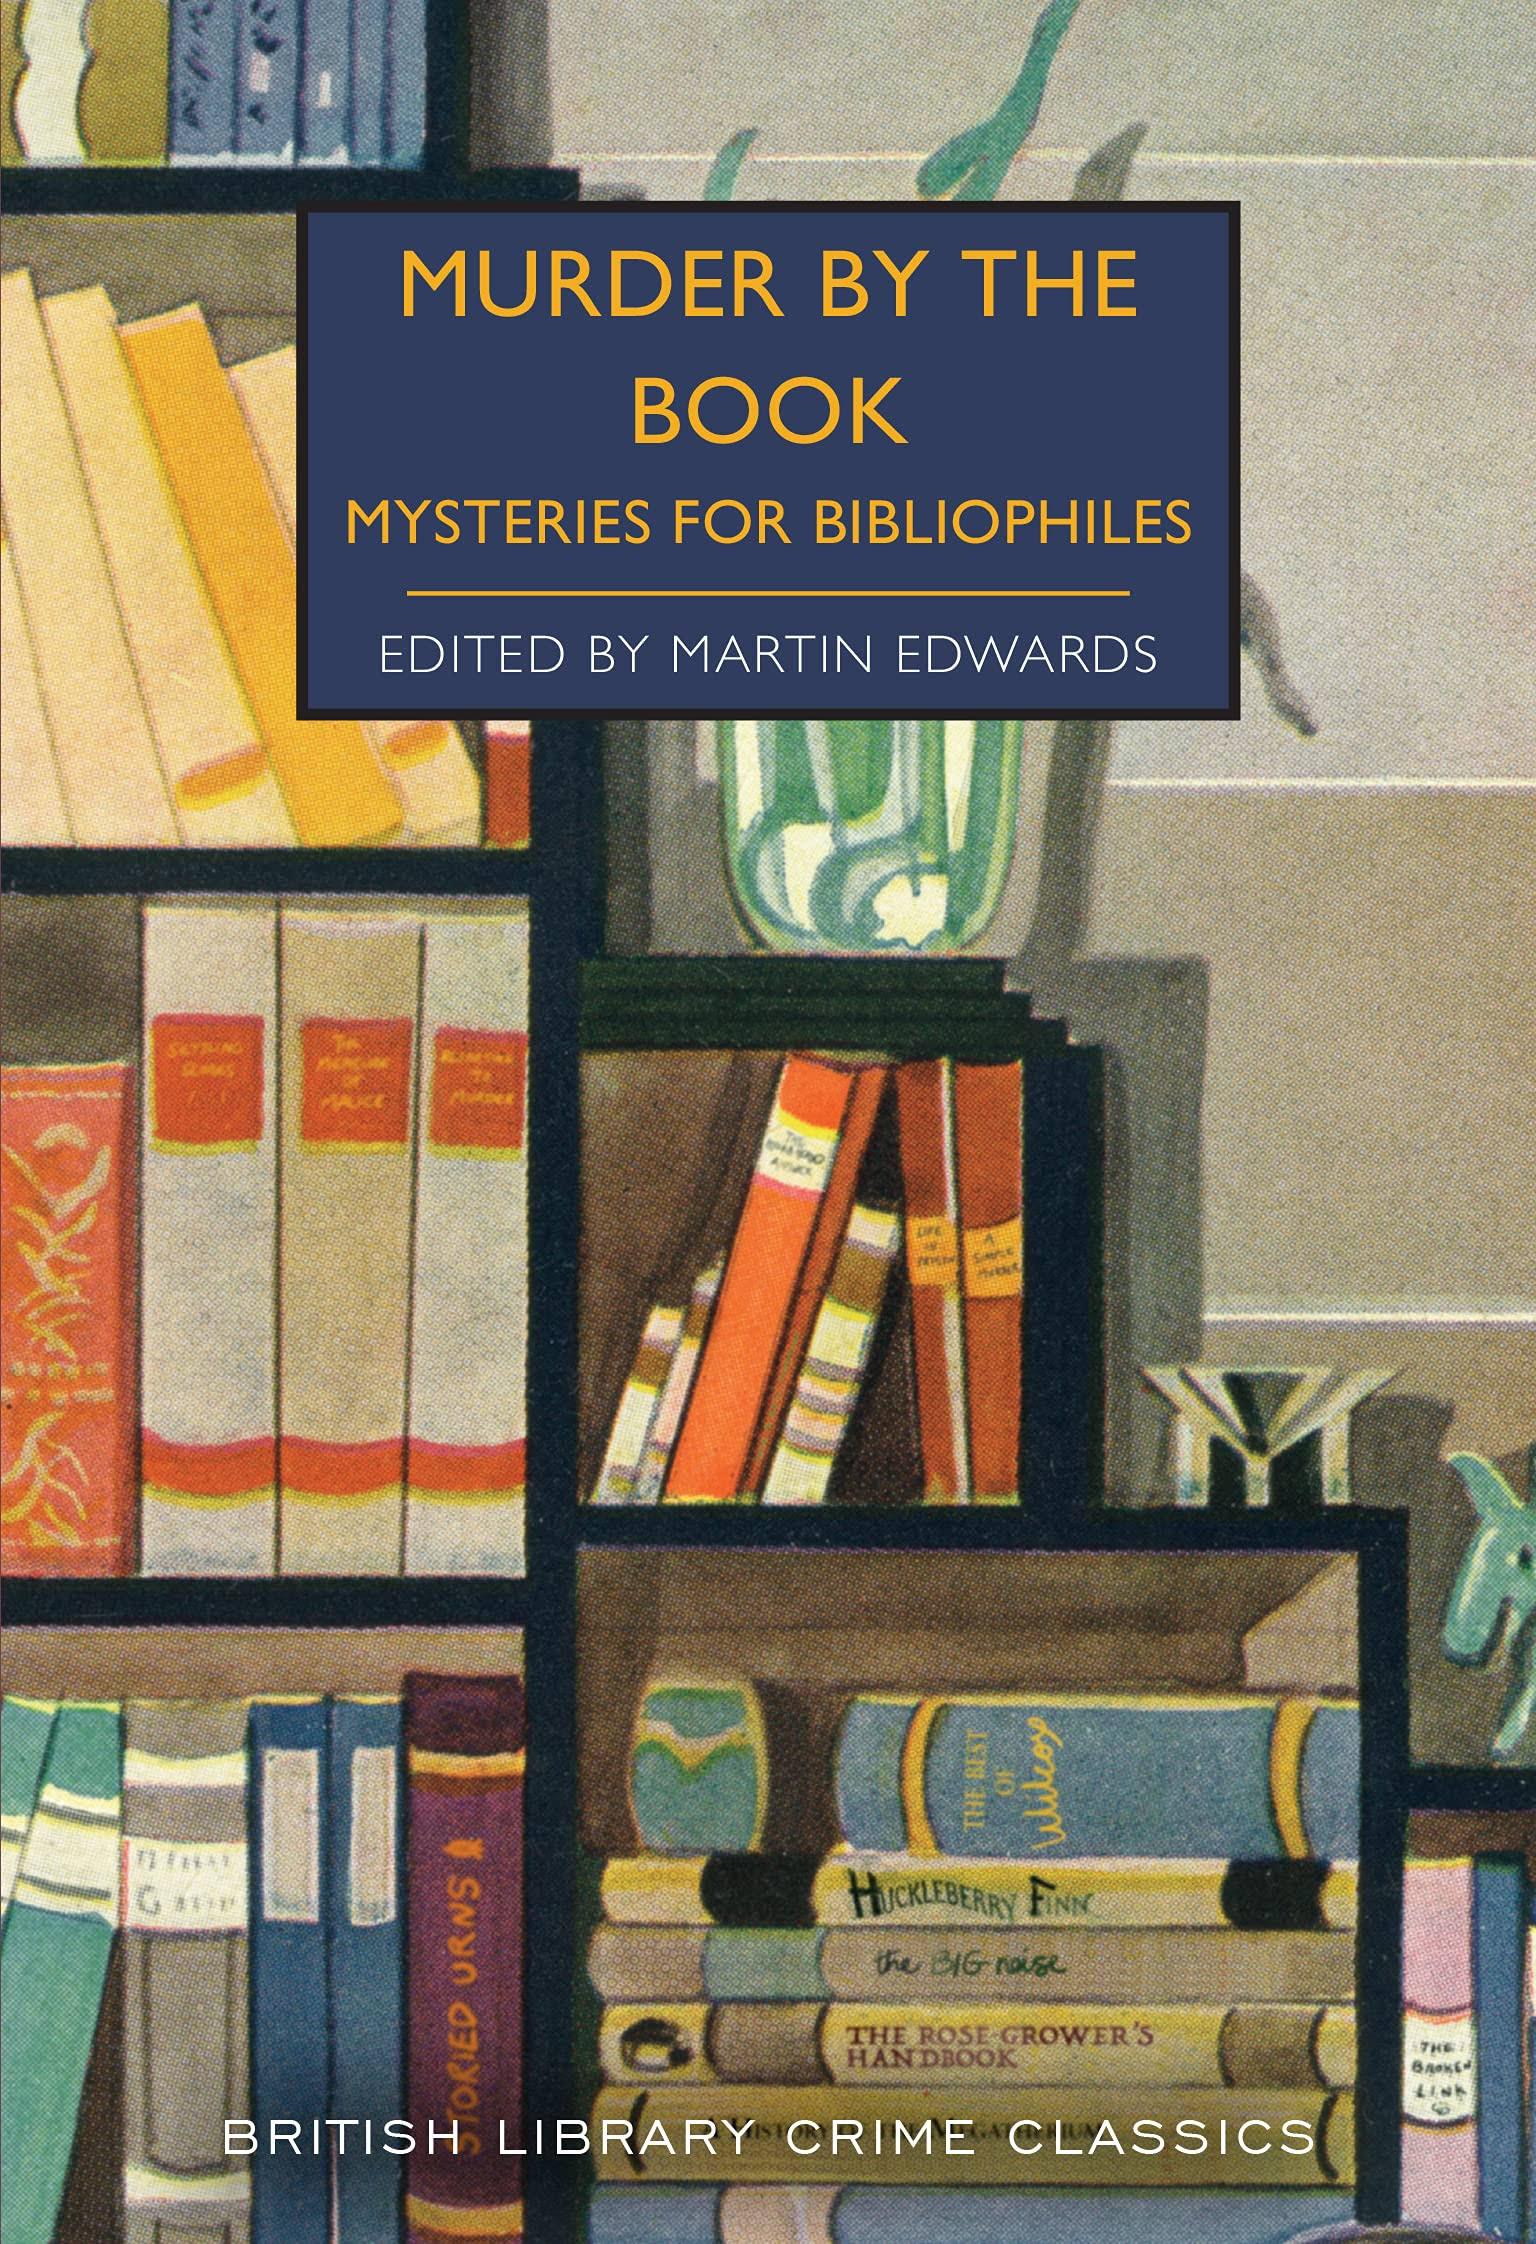 Murder by The Book by Martin Edwards